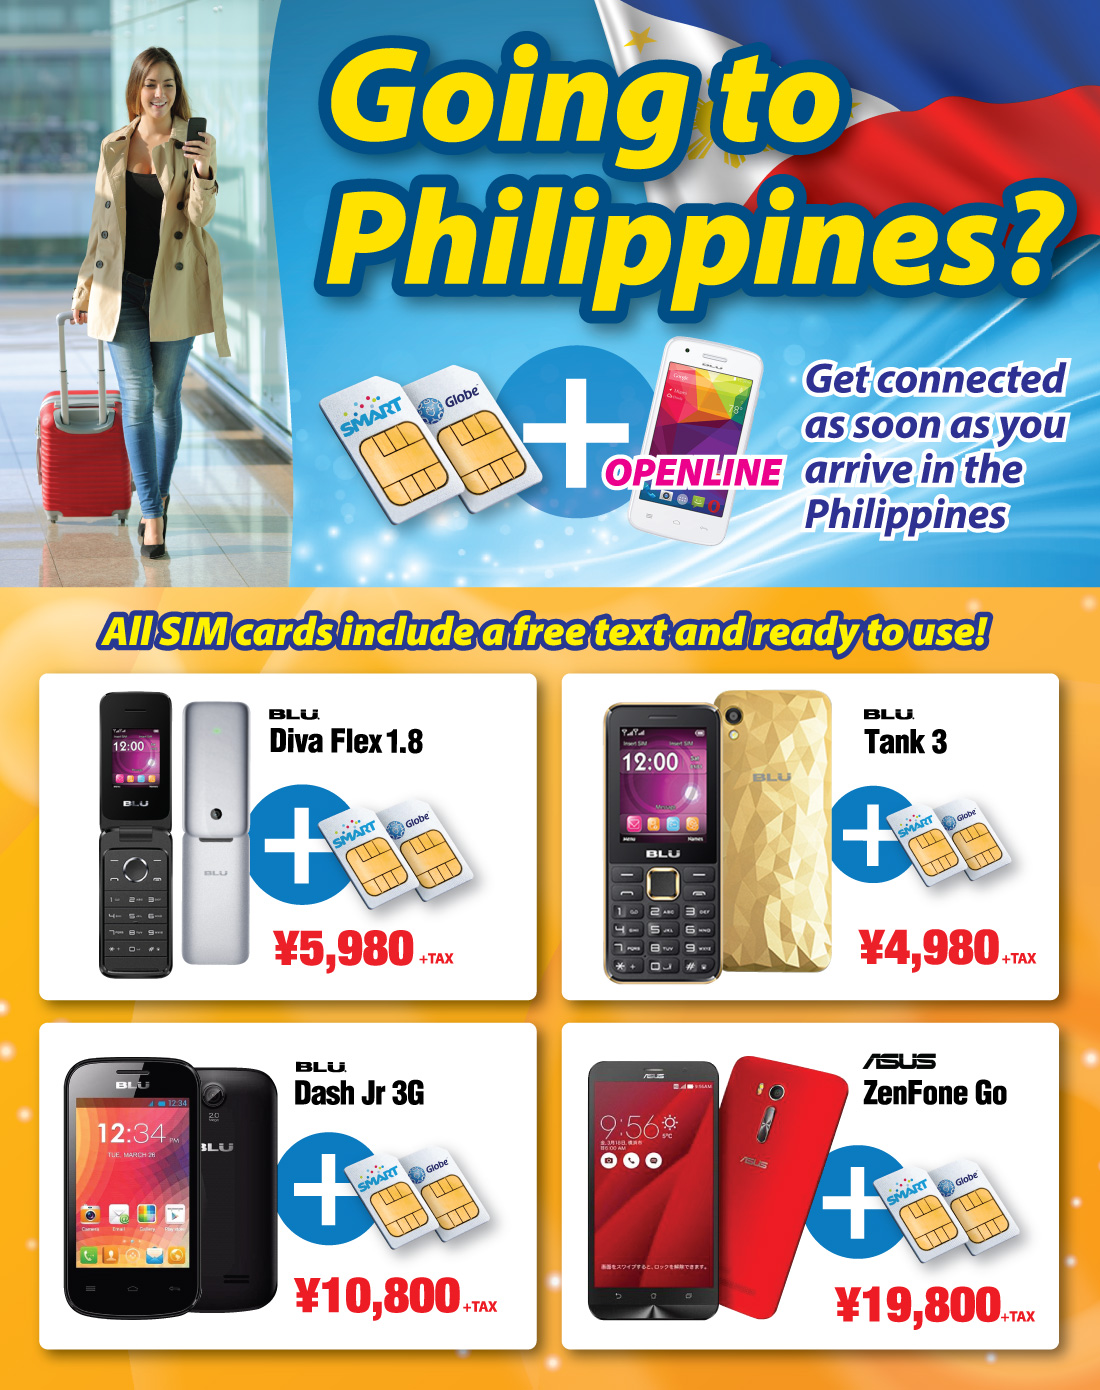 Going to Philippines?